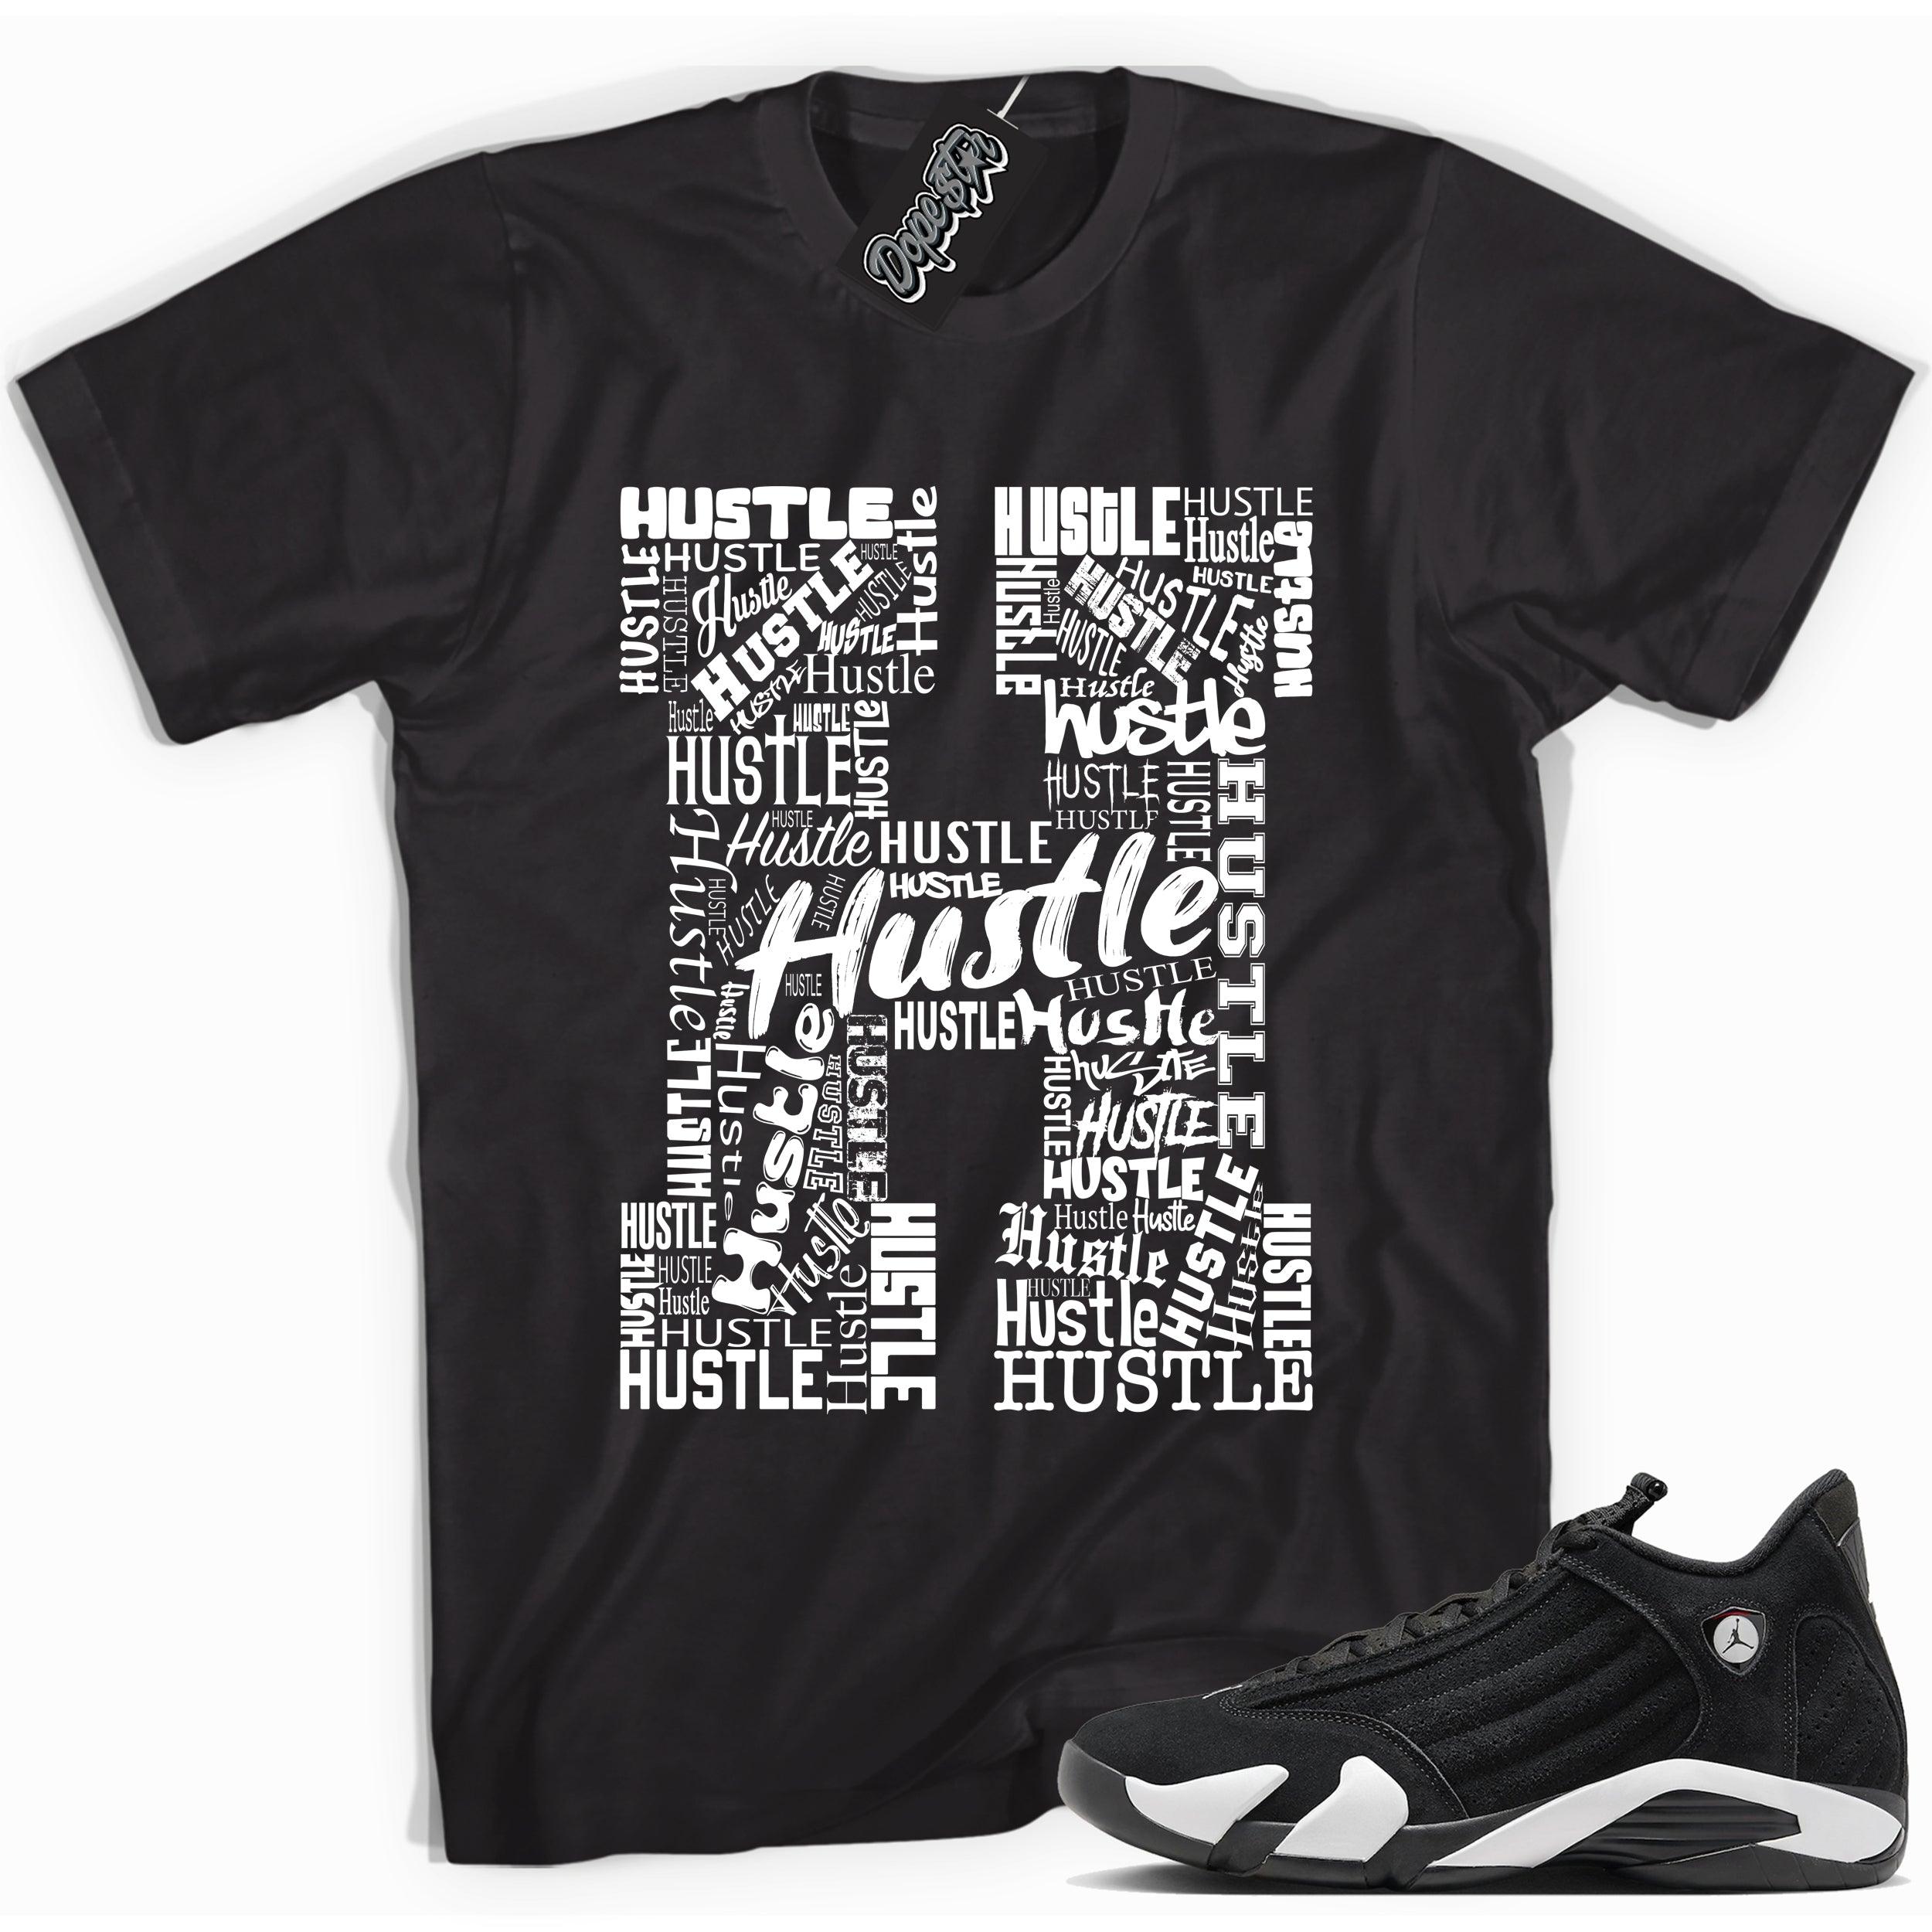 Cool Black graphic tee with “ Hustle H ” print, that perfectly matches Air Jordan 14 Black & White sneakers 